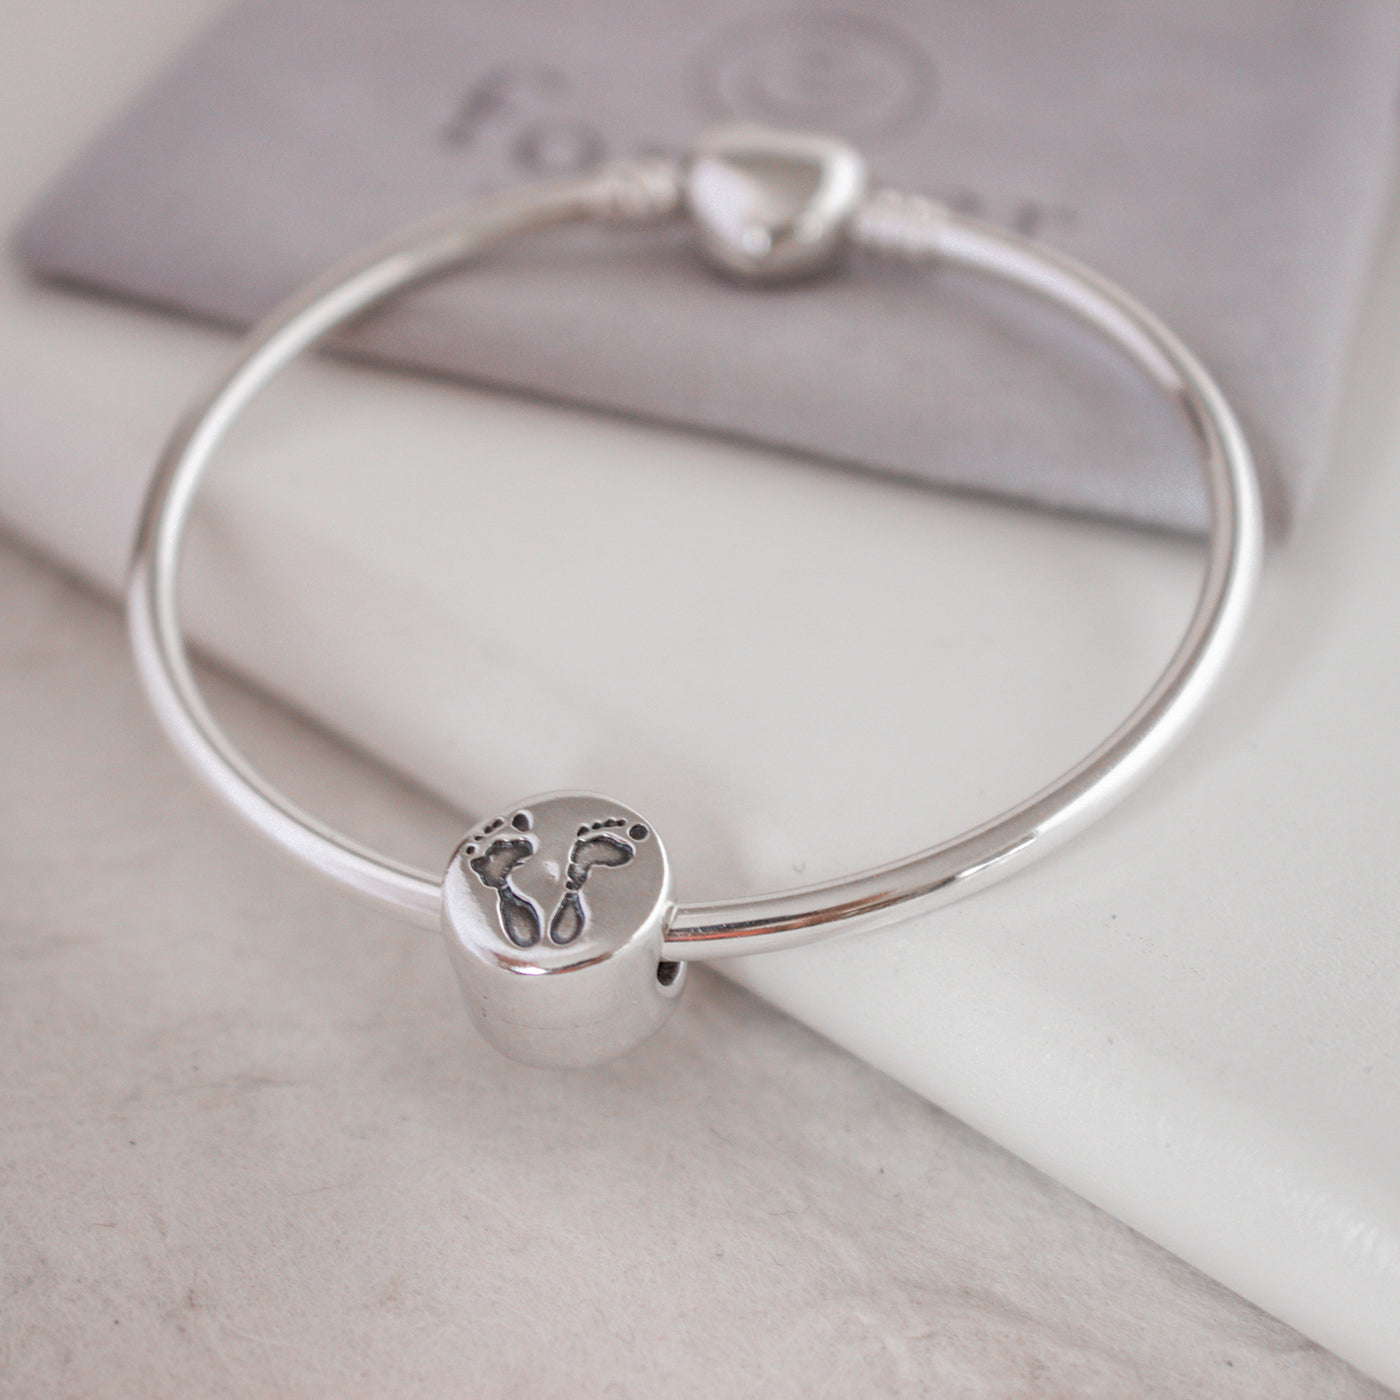 PERSONALIZED HAND OR FOOTPRINT CIRCLE PANDORA BEAD BANGLE | FOREVER IMPRINT JEWELLERY